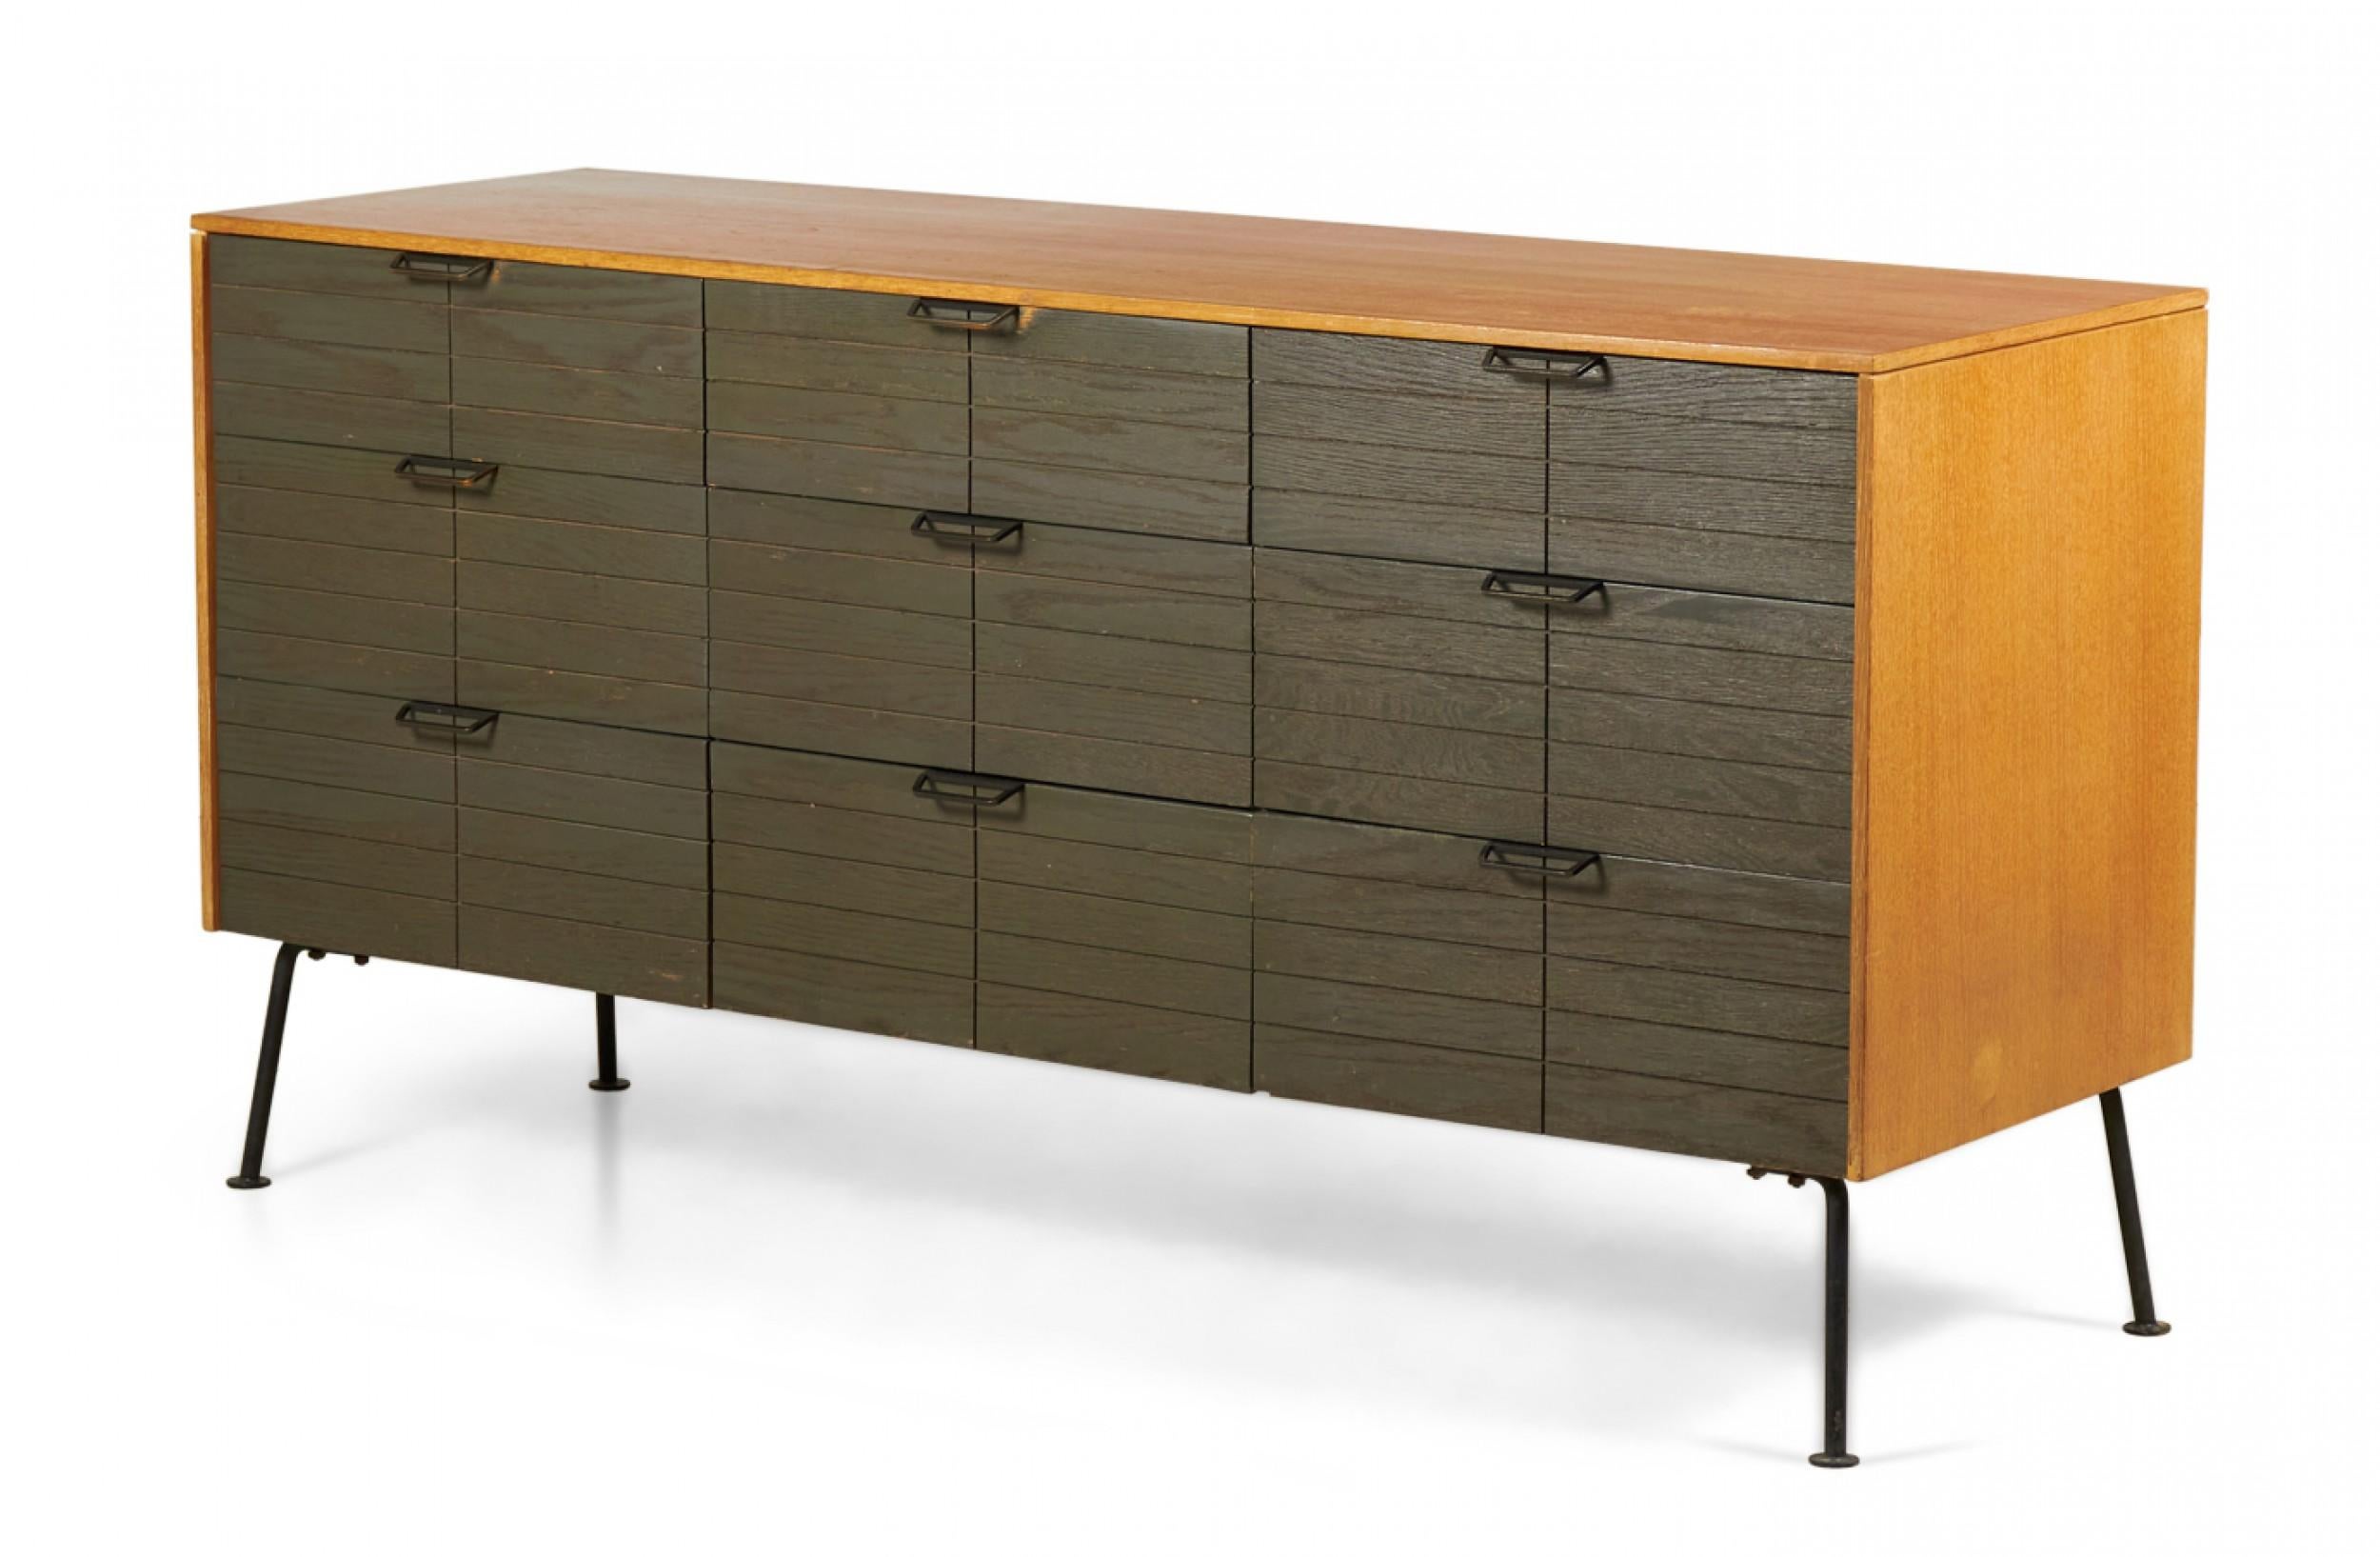 2 American Mid-Century (1950s) 9-drawer dressers with dark brown stained and geometrically incised drawer fronts with trapezoidal iron drawer pulls in a light walnut case resting on four angled iron legs ending in circular feet. (RAYMOND LOEWY FOR